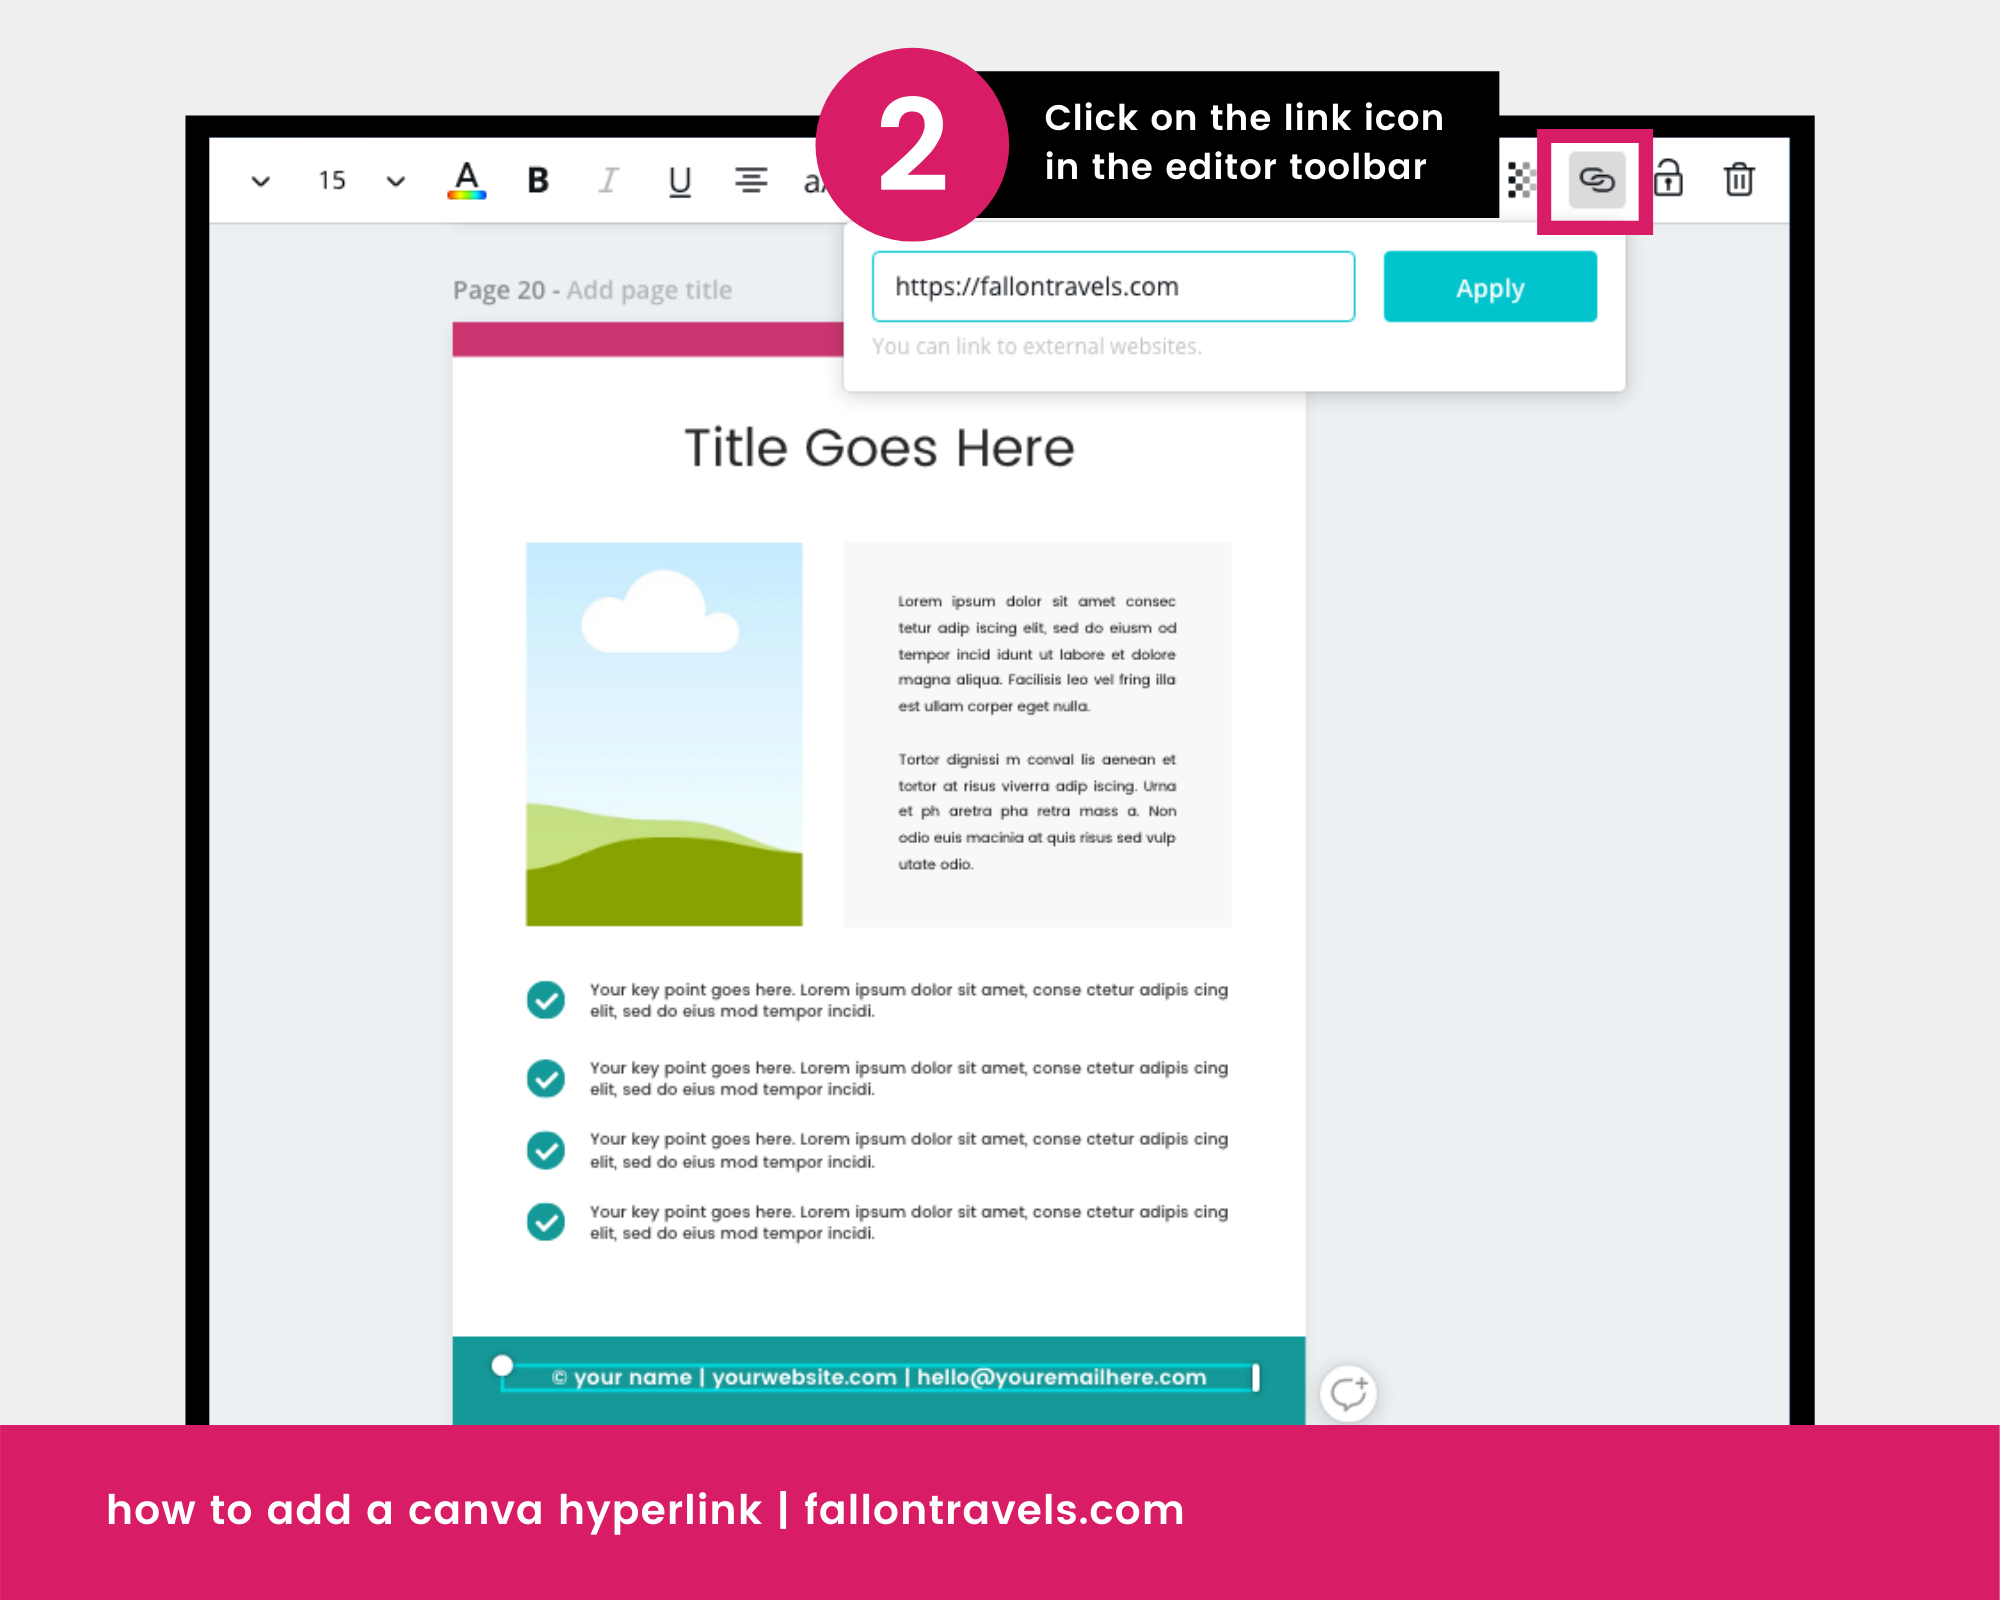 How to add hyperlinks in Canva